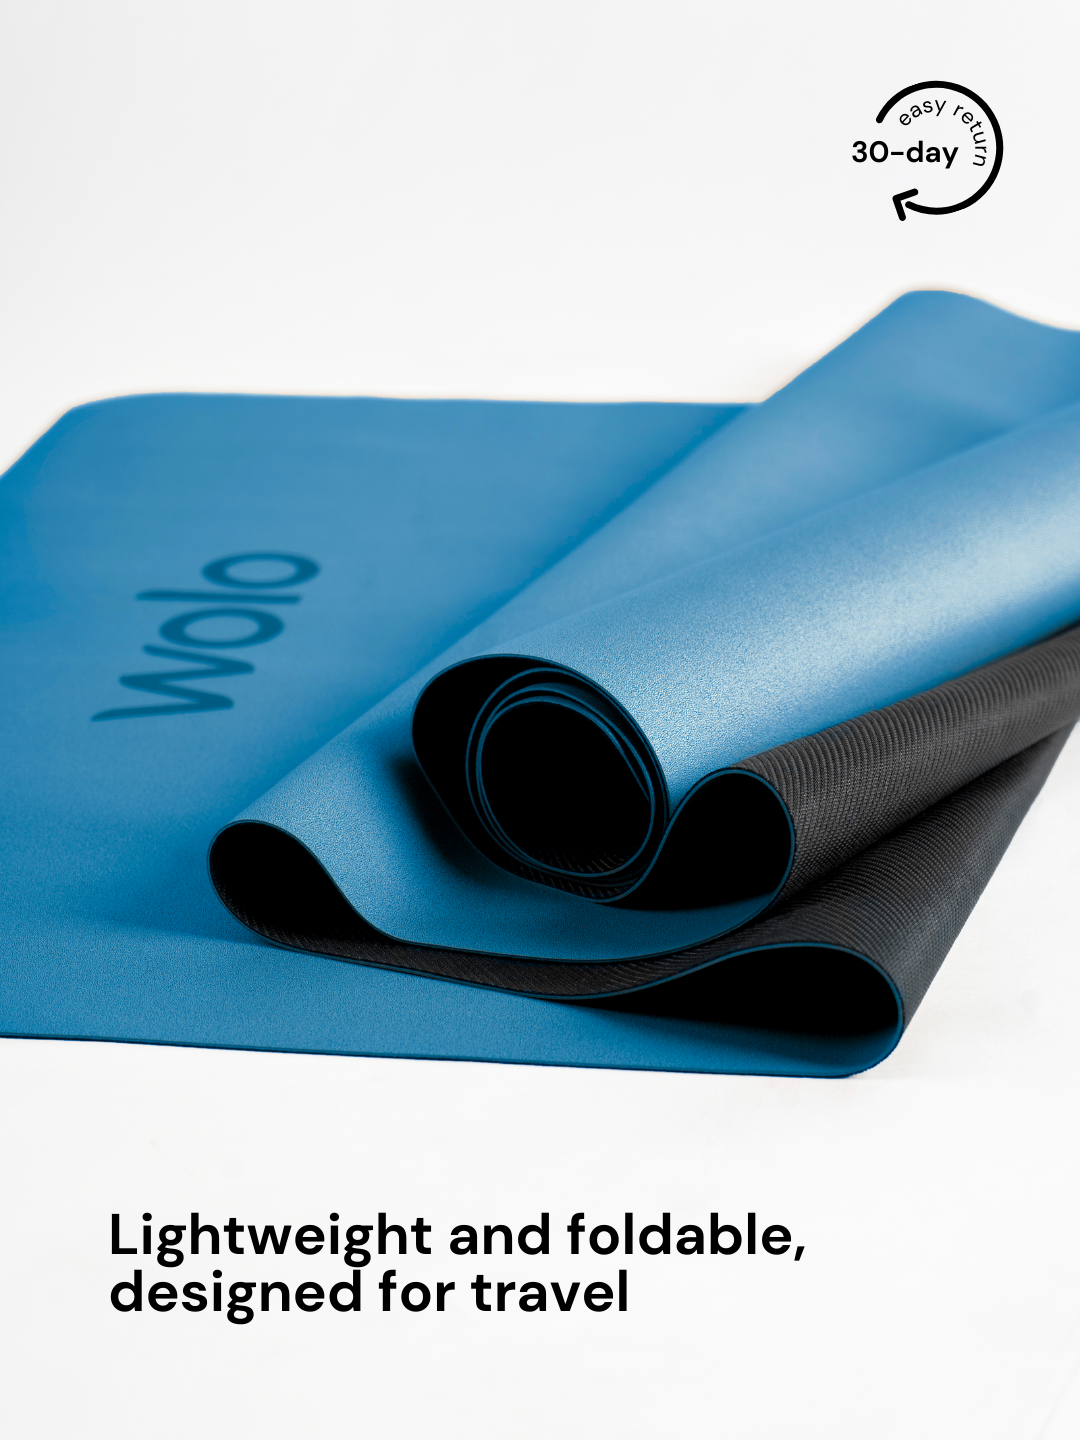 Rolled-up view of an Ocean blue foldable travel yoga mat